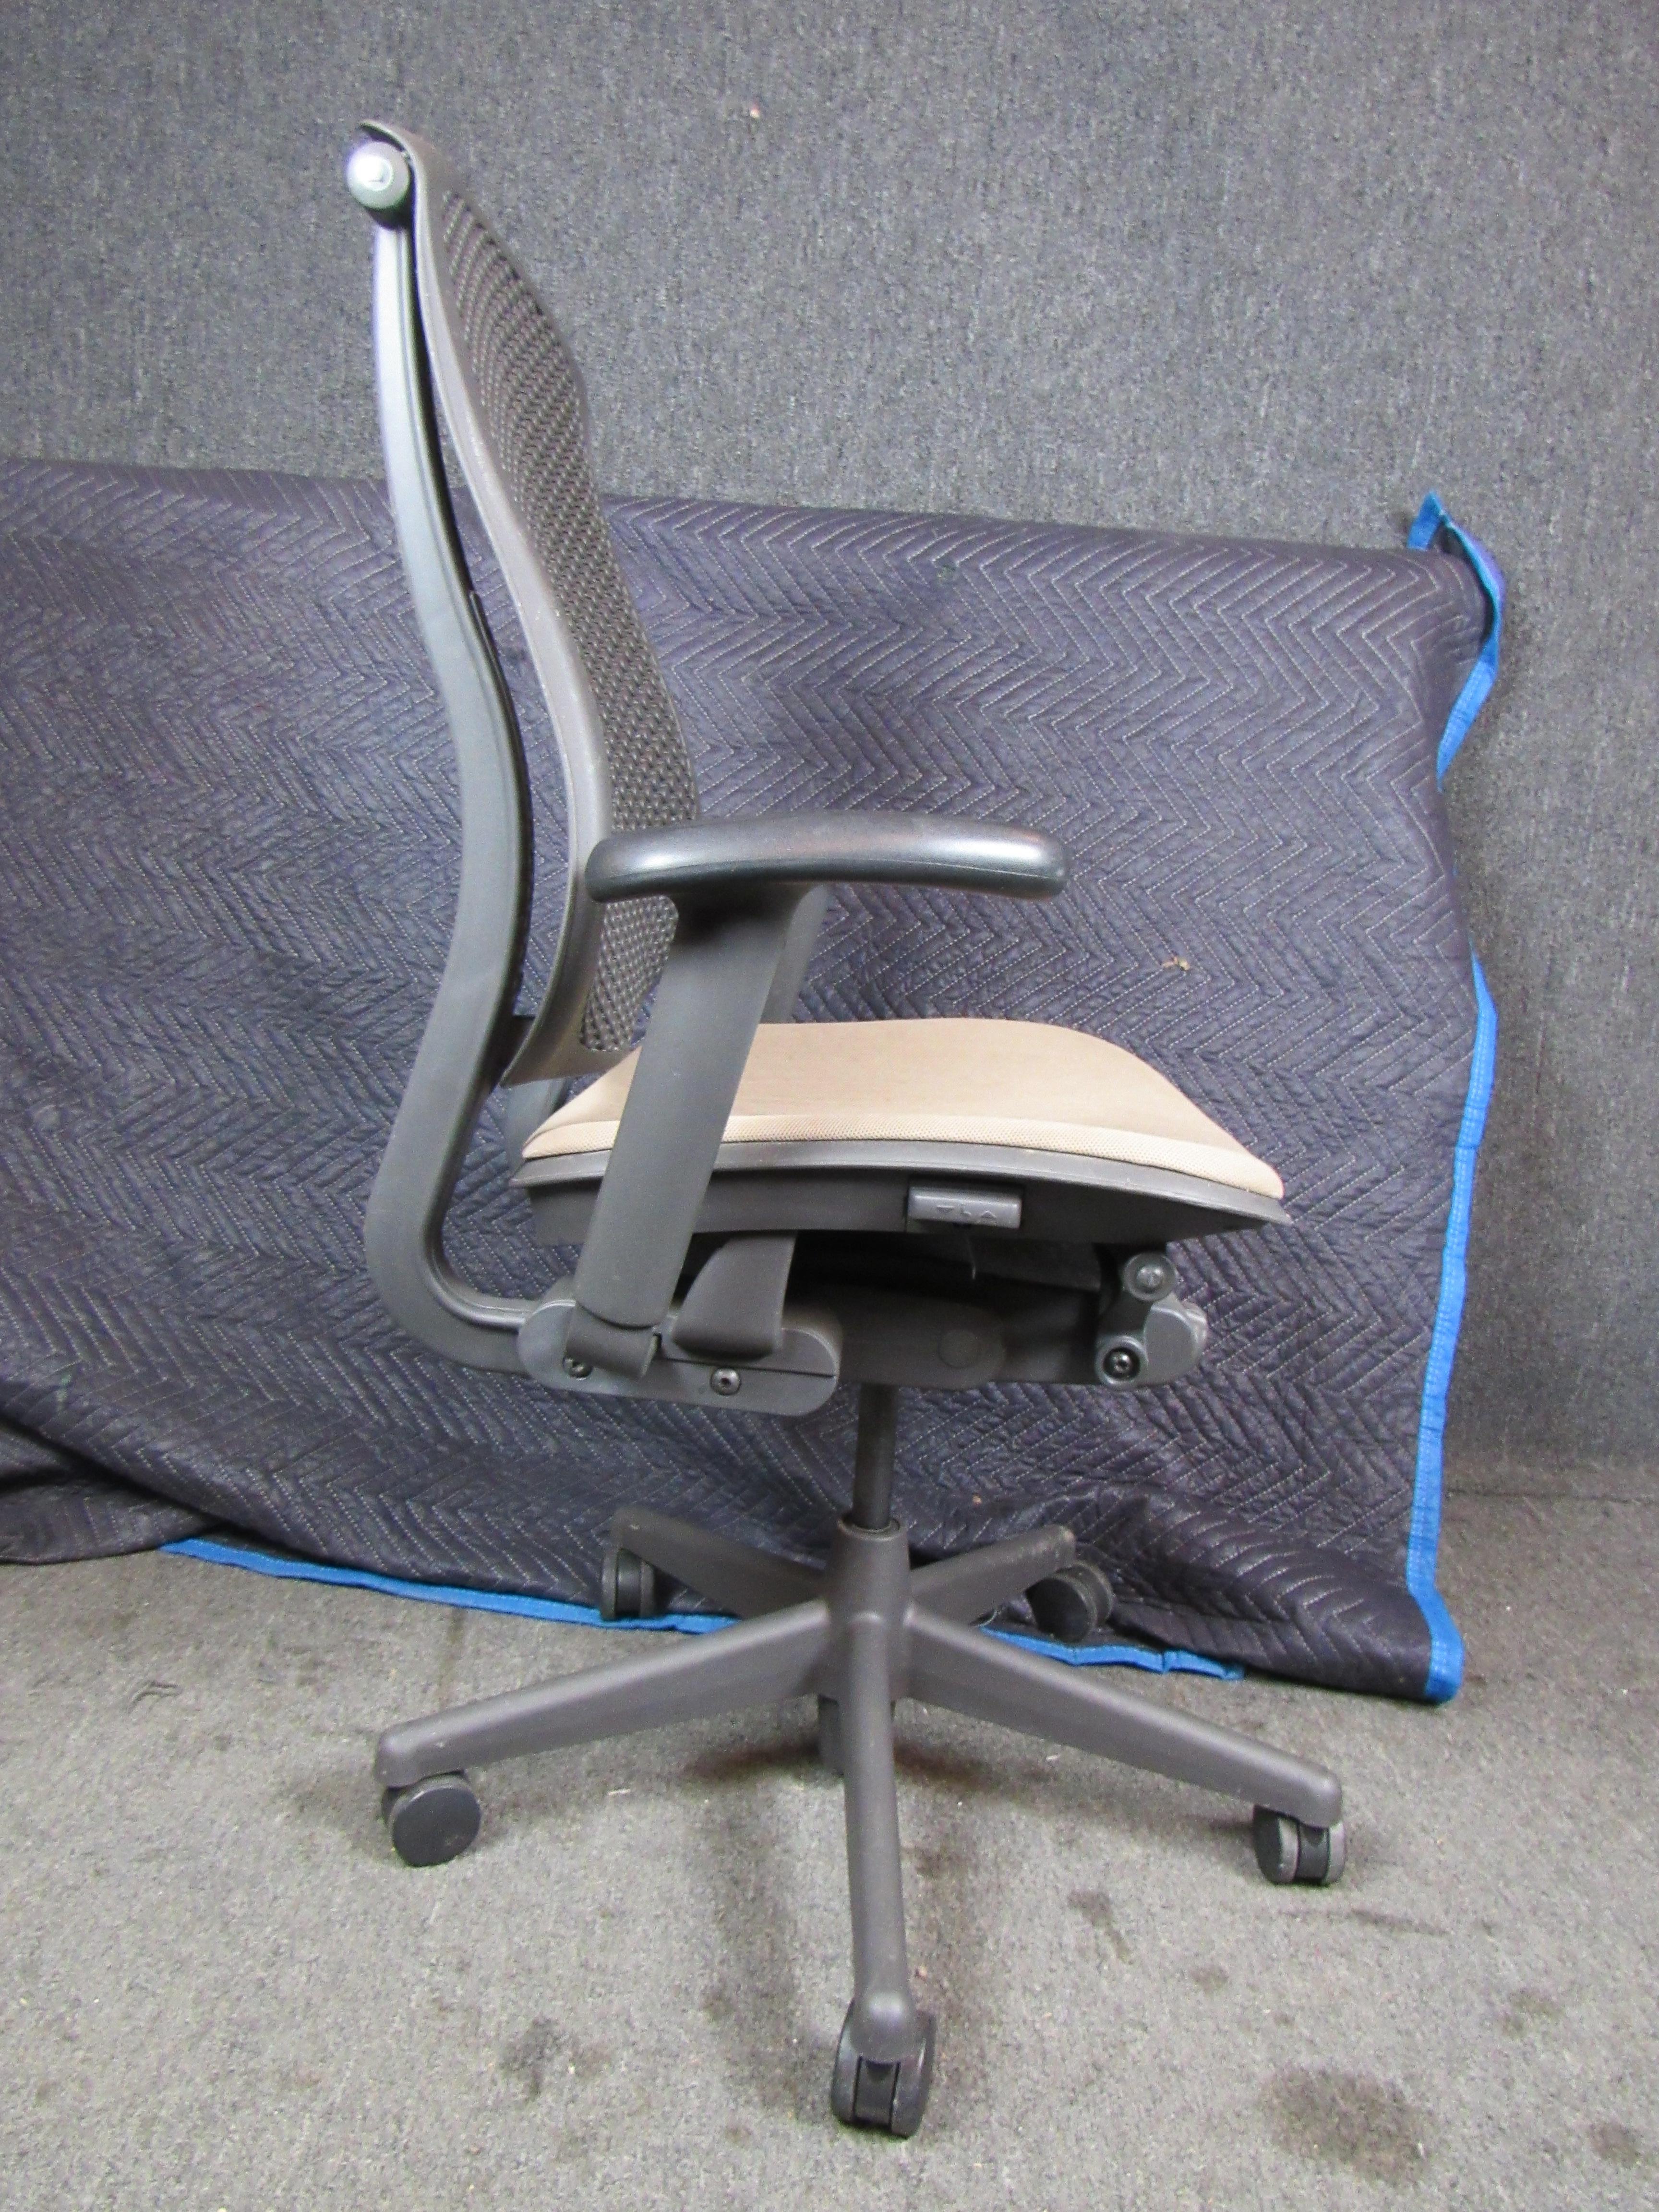 Single adjustable office chair made by Herman Miller. 
5 total available.
Please confirm location NY or NJ.